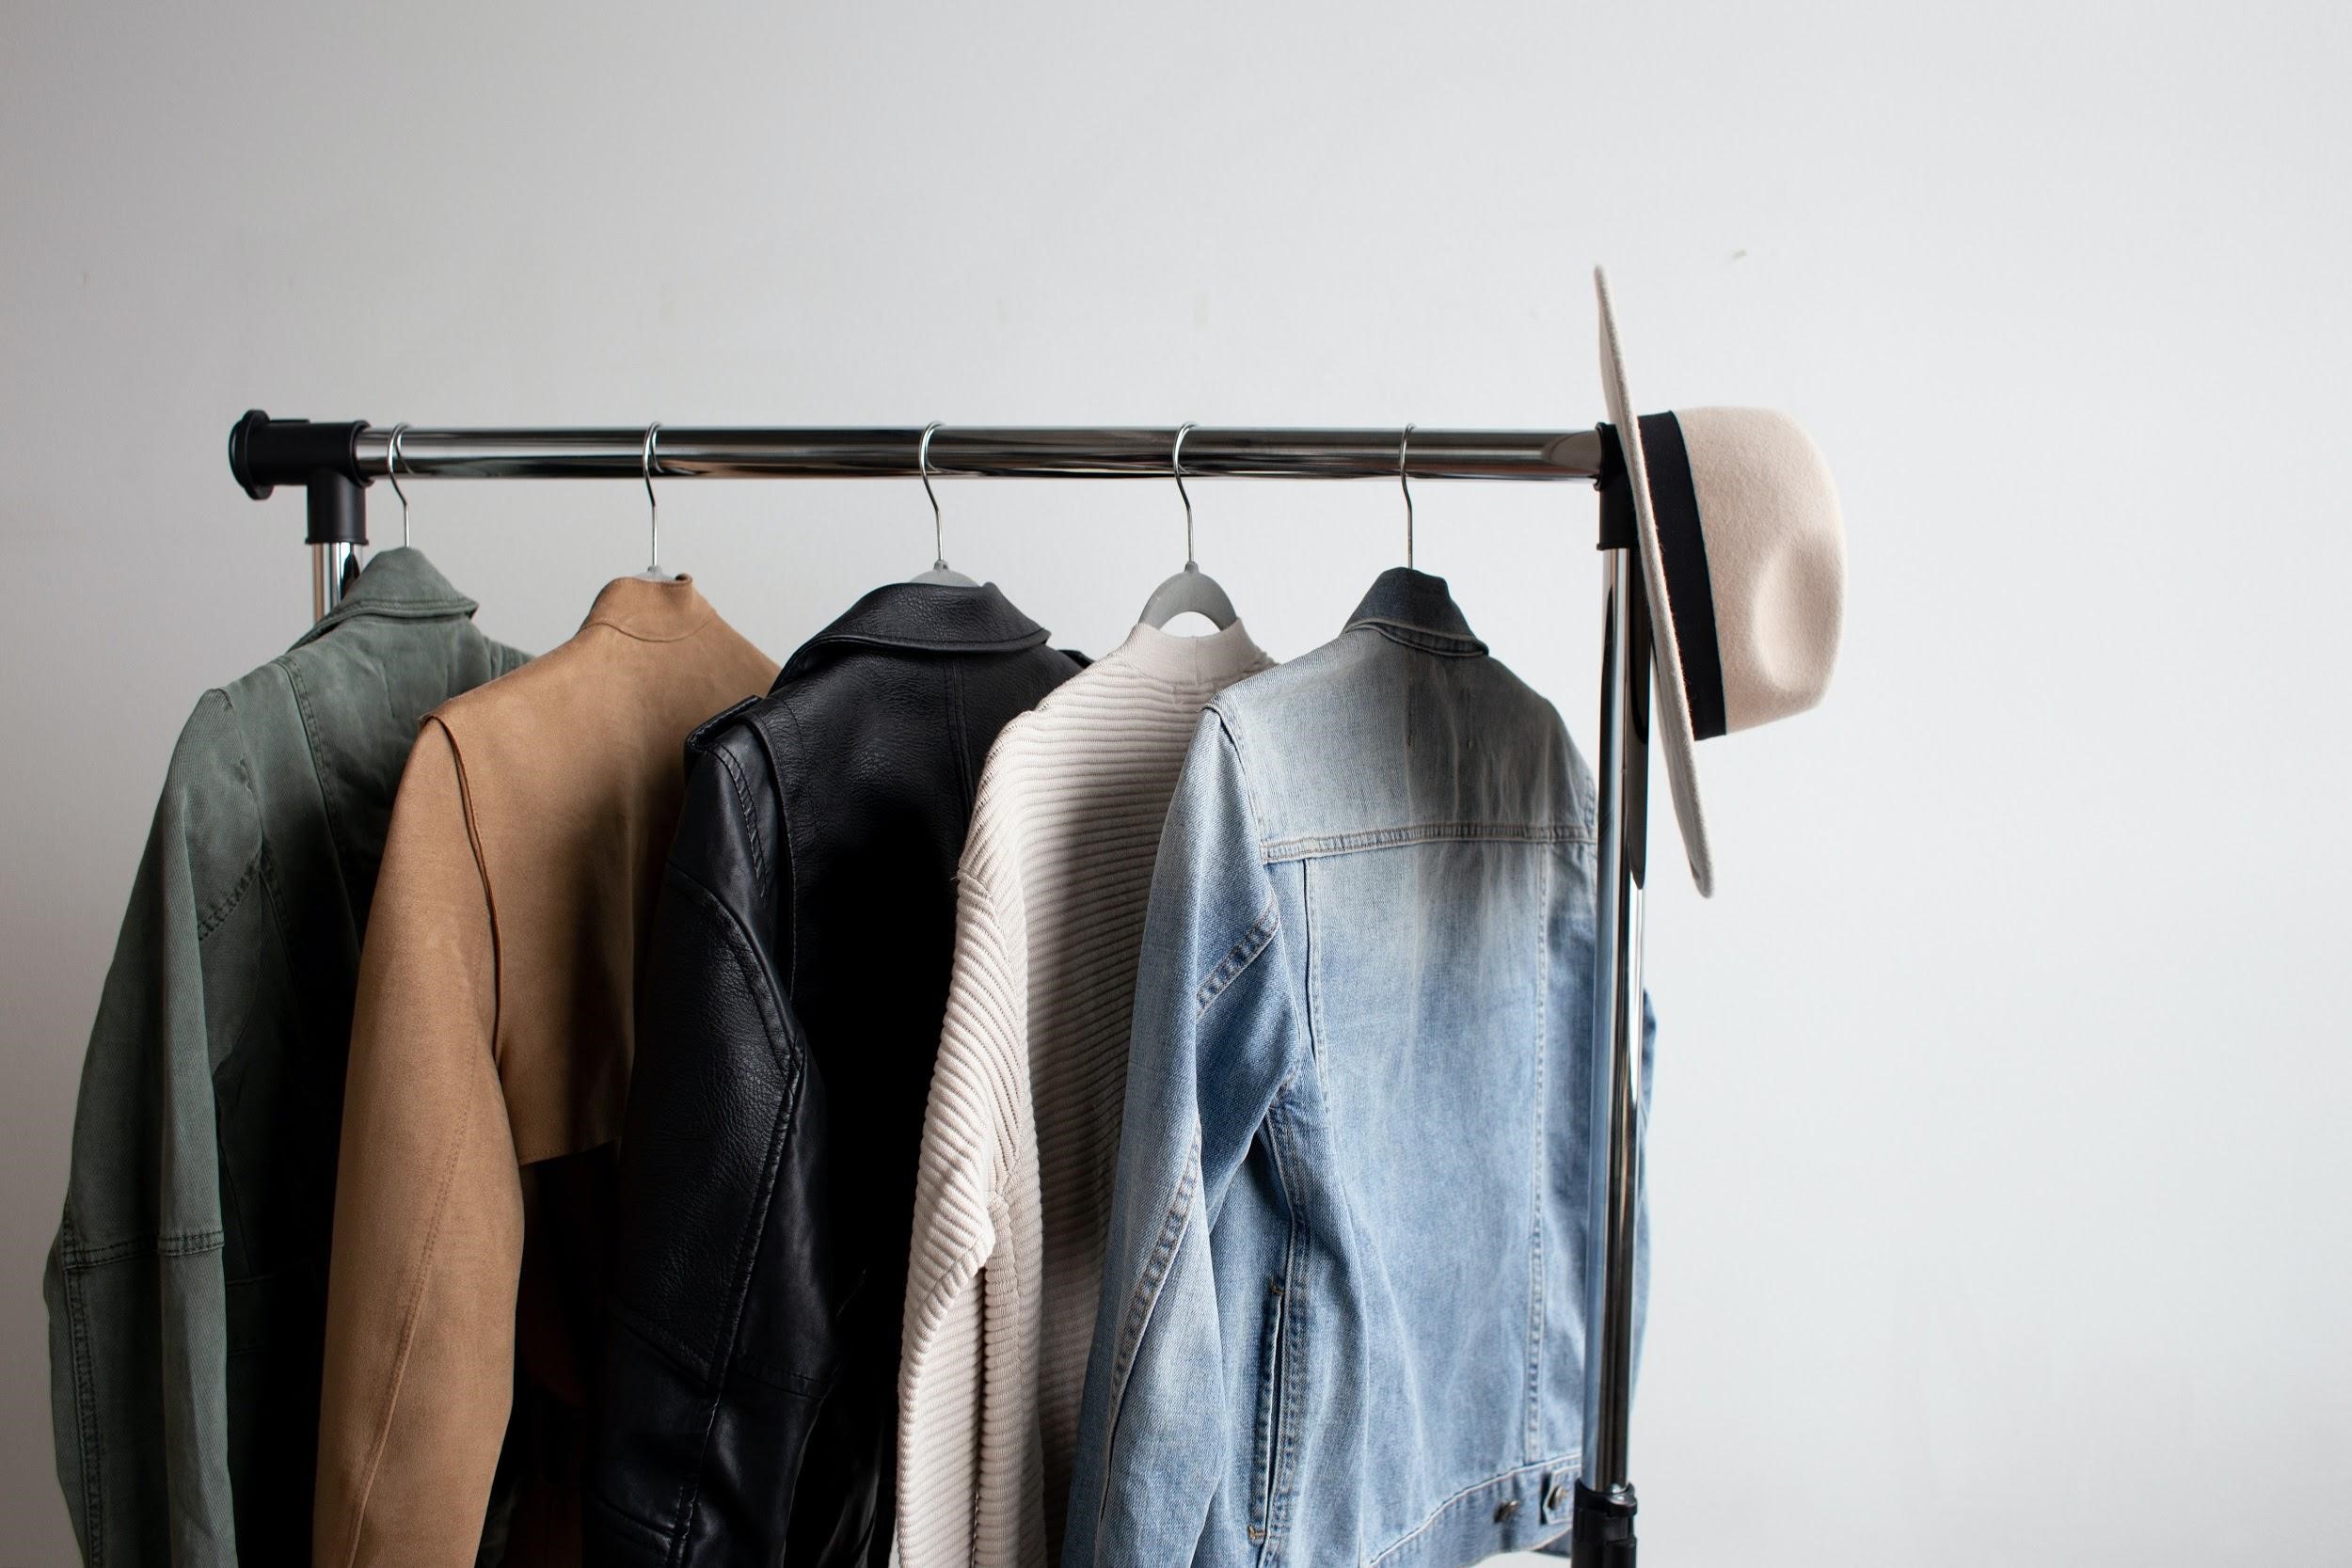 A Simple Wardrobe with Coats